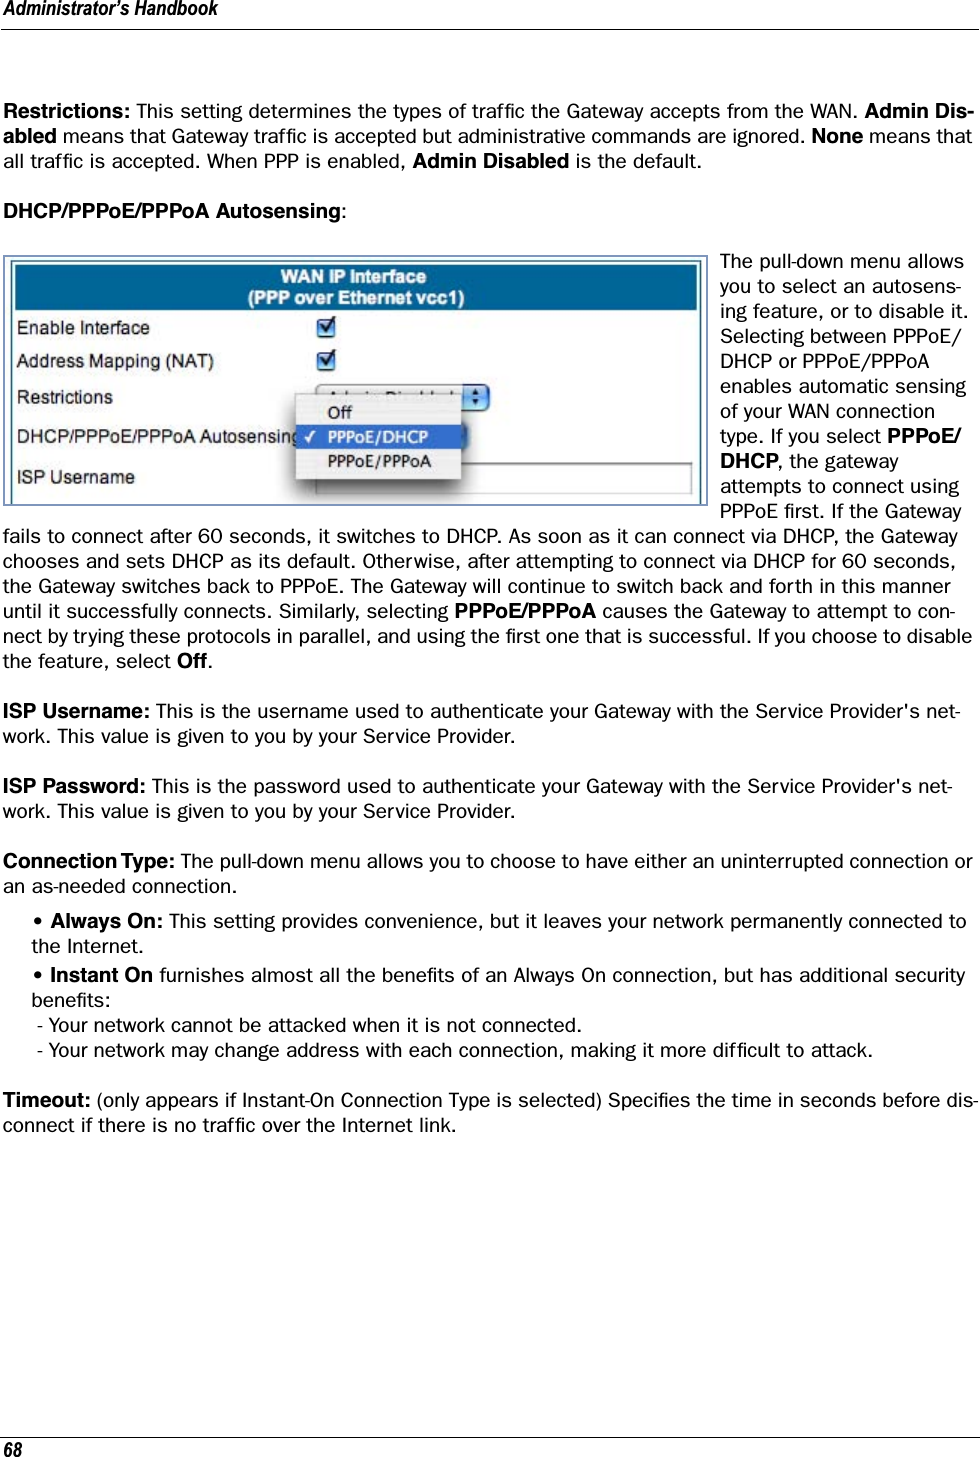 Administrator’s Handbook68Restrictions: This setting determines the types of trafﬁc the Gateway accepts from the WAN. Admin Dis-abled means that Gateway trafﬁc is accepted but administrative commands are ignored. None means that all trafﬁc is accepted. When PPP is enabled, Admin Disabled is the default.DHCP/PPPoE/PPPoA Autosensing: The pull-down menu allows you to select an autosens-ing feature, or to disable it. Selecting between PPPoE/DHCP or PPPoE/PPPoA enables automatic sensing of your WAN connection type. If you select PPPoE/DHCP, the gateway attempts to connect using PPPoE ﬁrst. If the Gateway fails to connect after 60 seconds, it switches to DHCP. As soon as it can connect via DHCP, the Gateway chooses and sets DHCP as its default. Otherwise, after attempting to connect via DHCP for 60 seconds, the Gateway switches back to PPPoE. The Gateway will continue to switch back and forth in this manner until it successfully connects. Similarly, selecting PPPoE/PPPoA causes the Gateway to attempt to con-nect by trying these protocols in parallel, and using the ﬁrst one that is successful. If you choose to disable the feature, select Off.ISP Username: This is the username used to authenticate your Gateway with the Service Provider&apos;s net-work. This value is given to you by your Service Provider.ISP Password: This is the password used to authenticate your Gateway with the Service Provider&apos;s net-work. This value is given to you by your Service Provider.Connection Type: The pull-down menu allows you to choose to have either an uninterrupted connection or an as-needed connection.• Always On: This setting provides convenience, but it leaves your network permanently connected to the Internet.• Instant On furnishes almost all the beneﬁts of an Always On connection, but has additional security beneﬁts: - Your network cannot be attacked when it is not connected. - Your network may change address with each connection, making it more difﬁcult to attack.Timeout: (only appears if Instant-On Connection Type is selected) Speciﬁes the time in seconds before dis-connect if there is no trafﬁc over the Internet link.